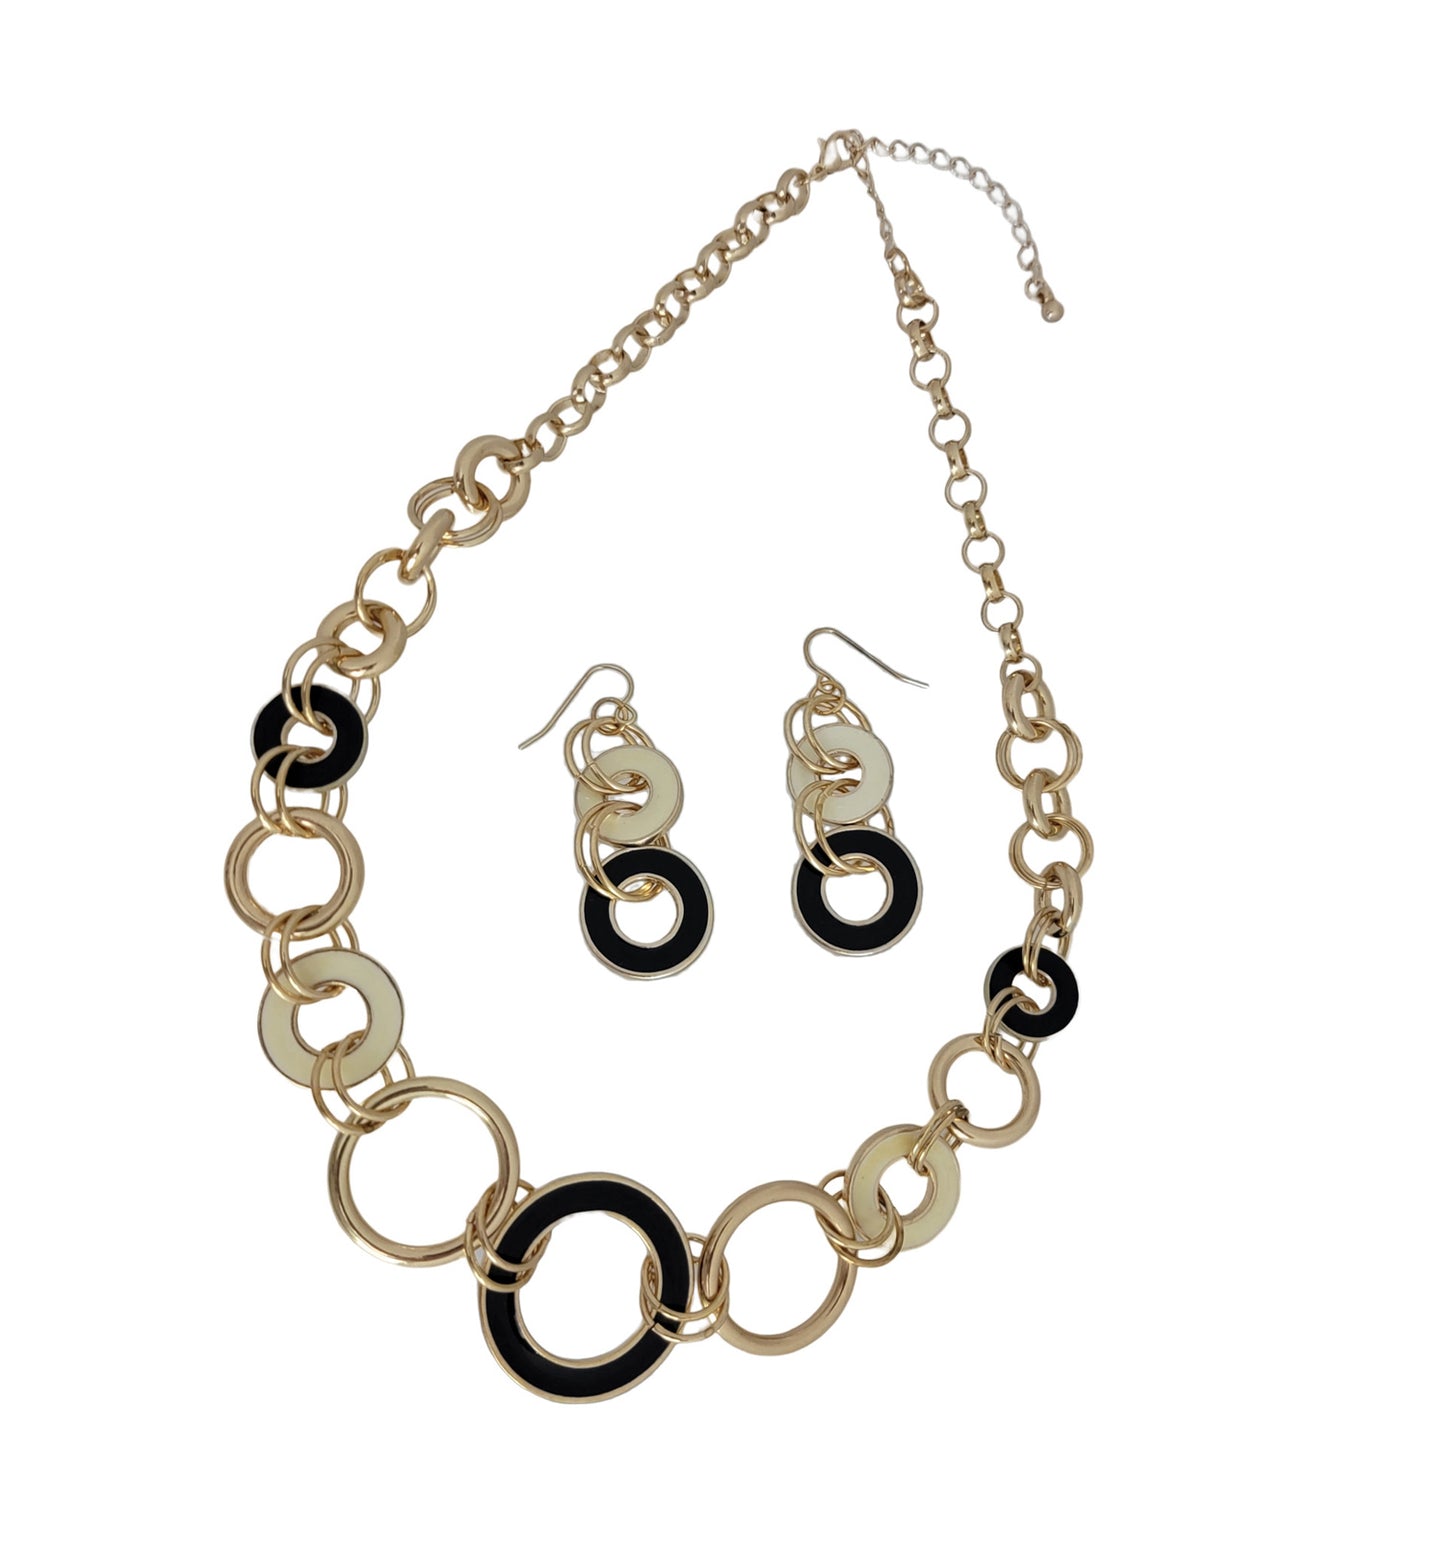 Black & White Circle Chain Link Necklace Pierced Earrings Set Gold Tone